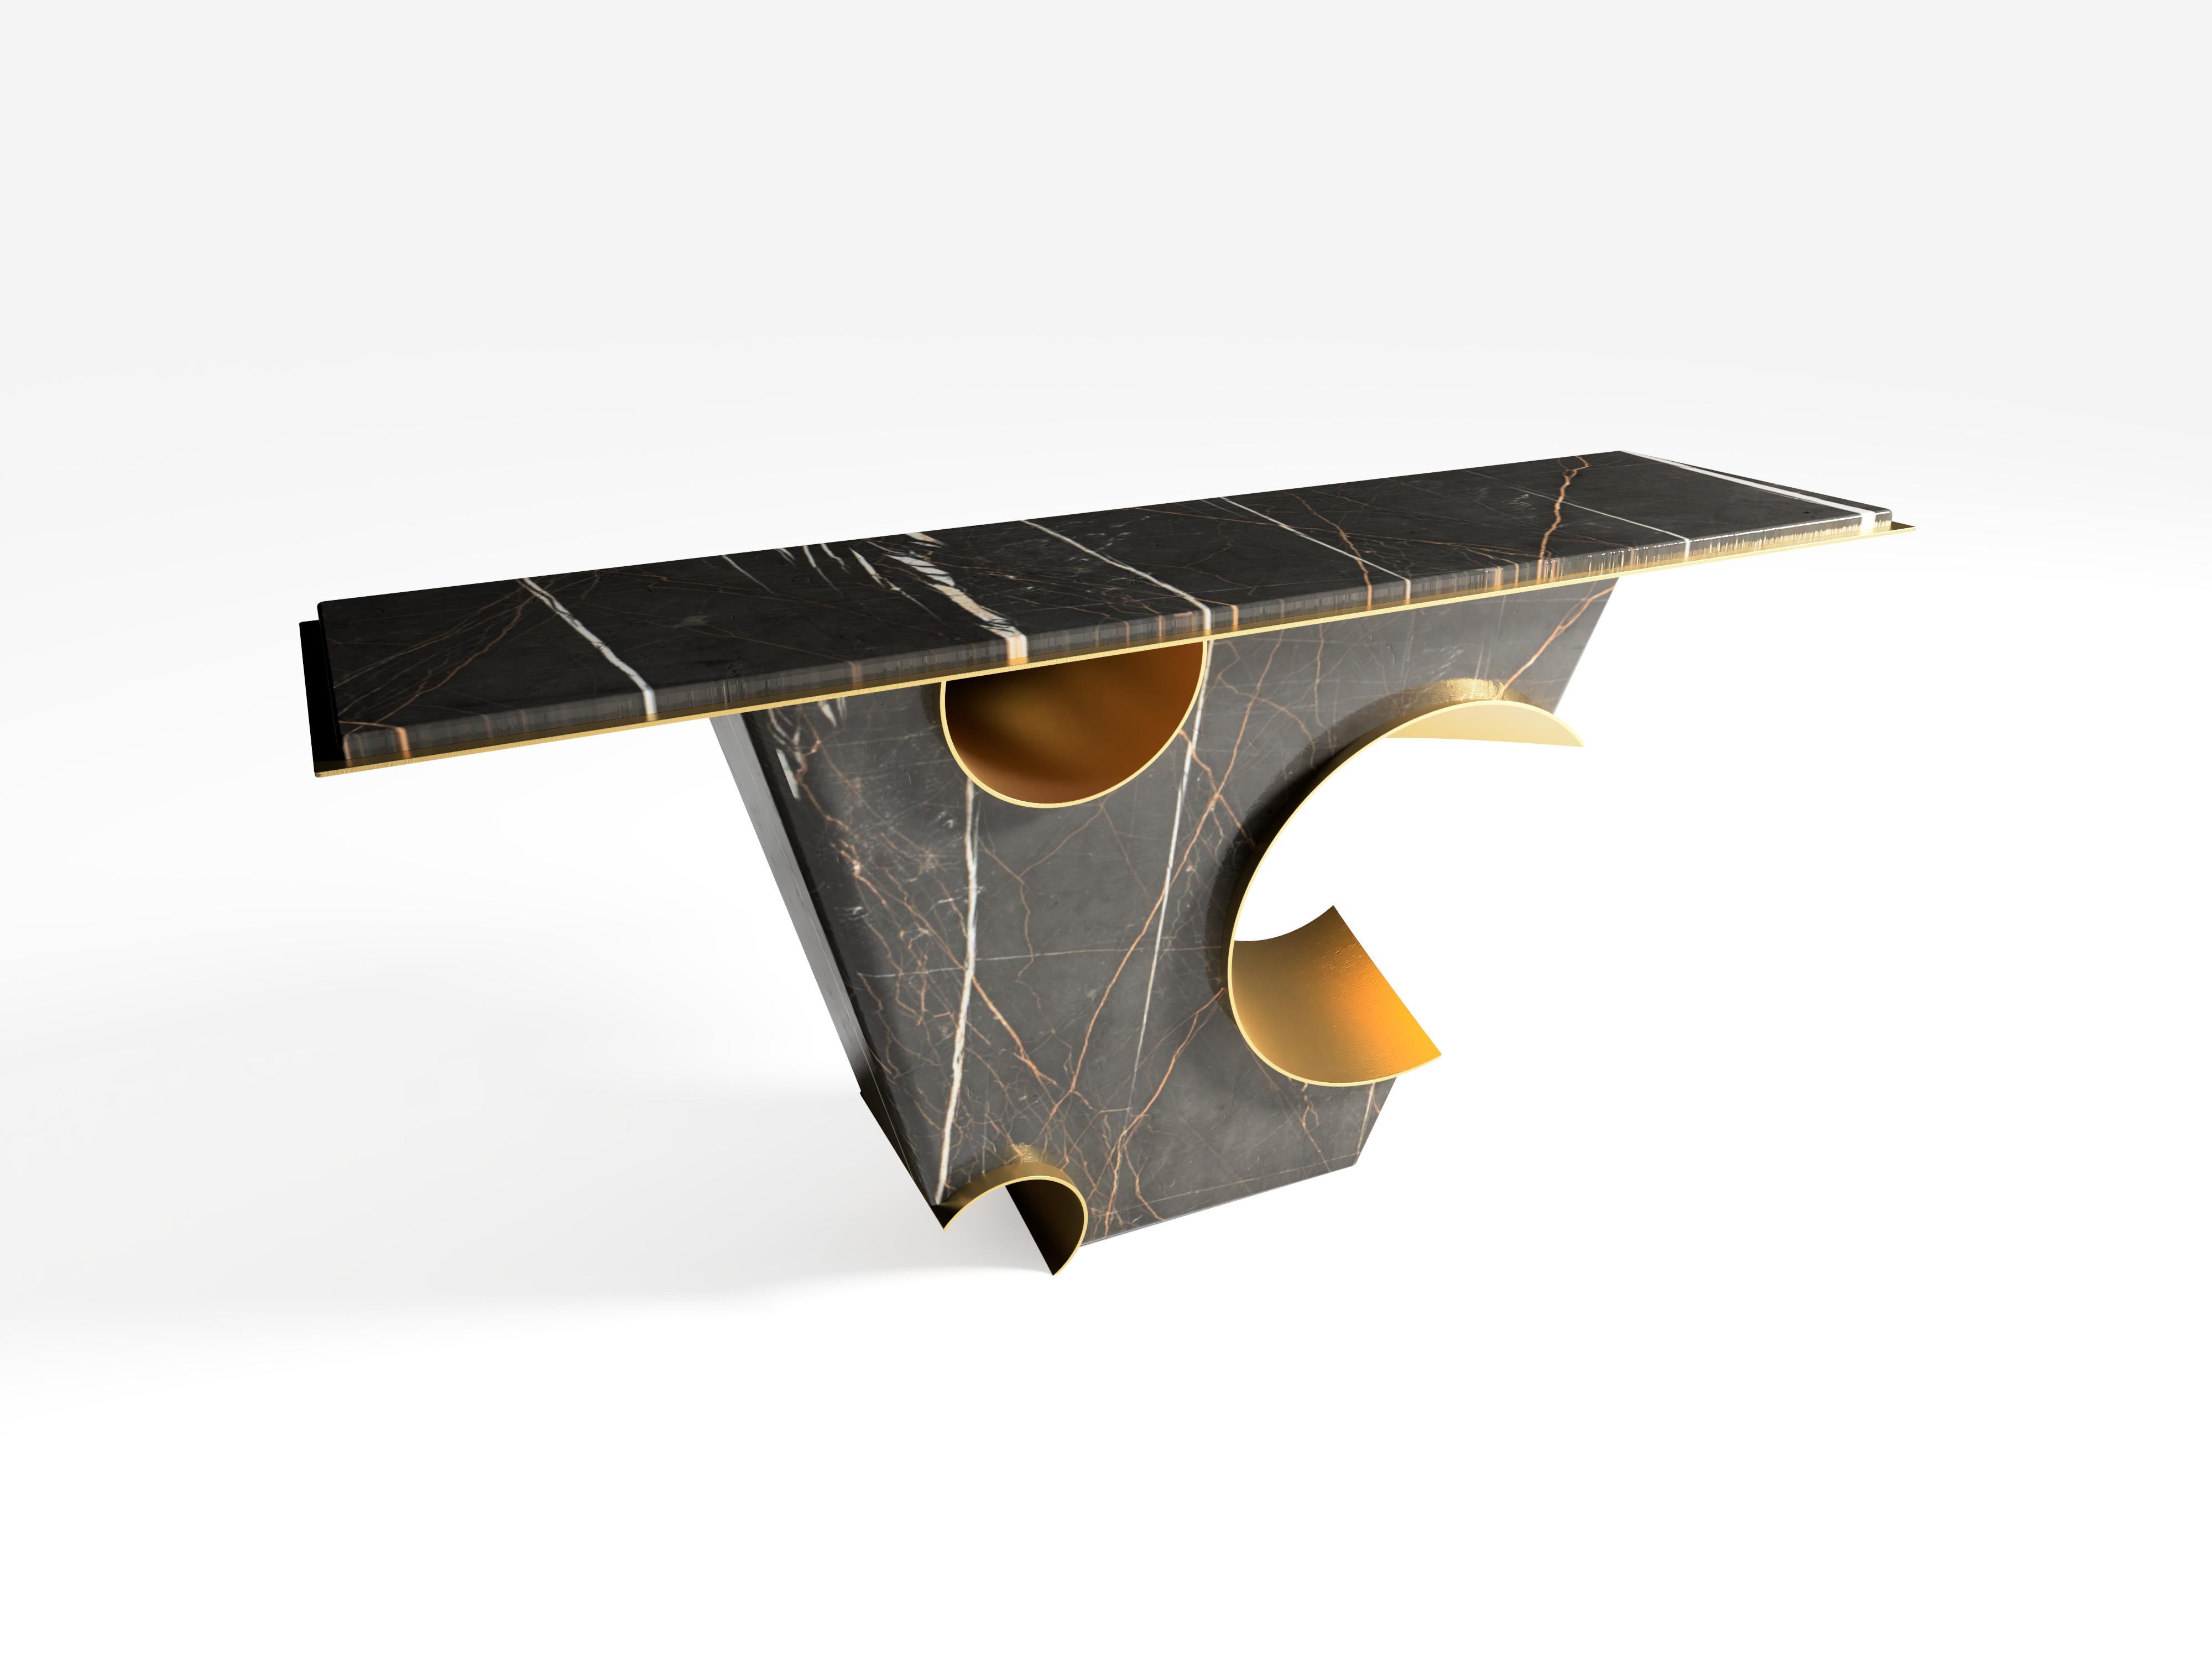 Hand-Crafted The Galactic Console Table, 1 of 1 by Grzegorz Majka For Sale